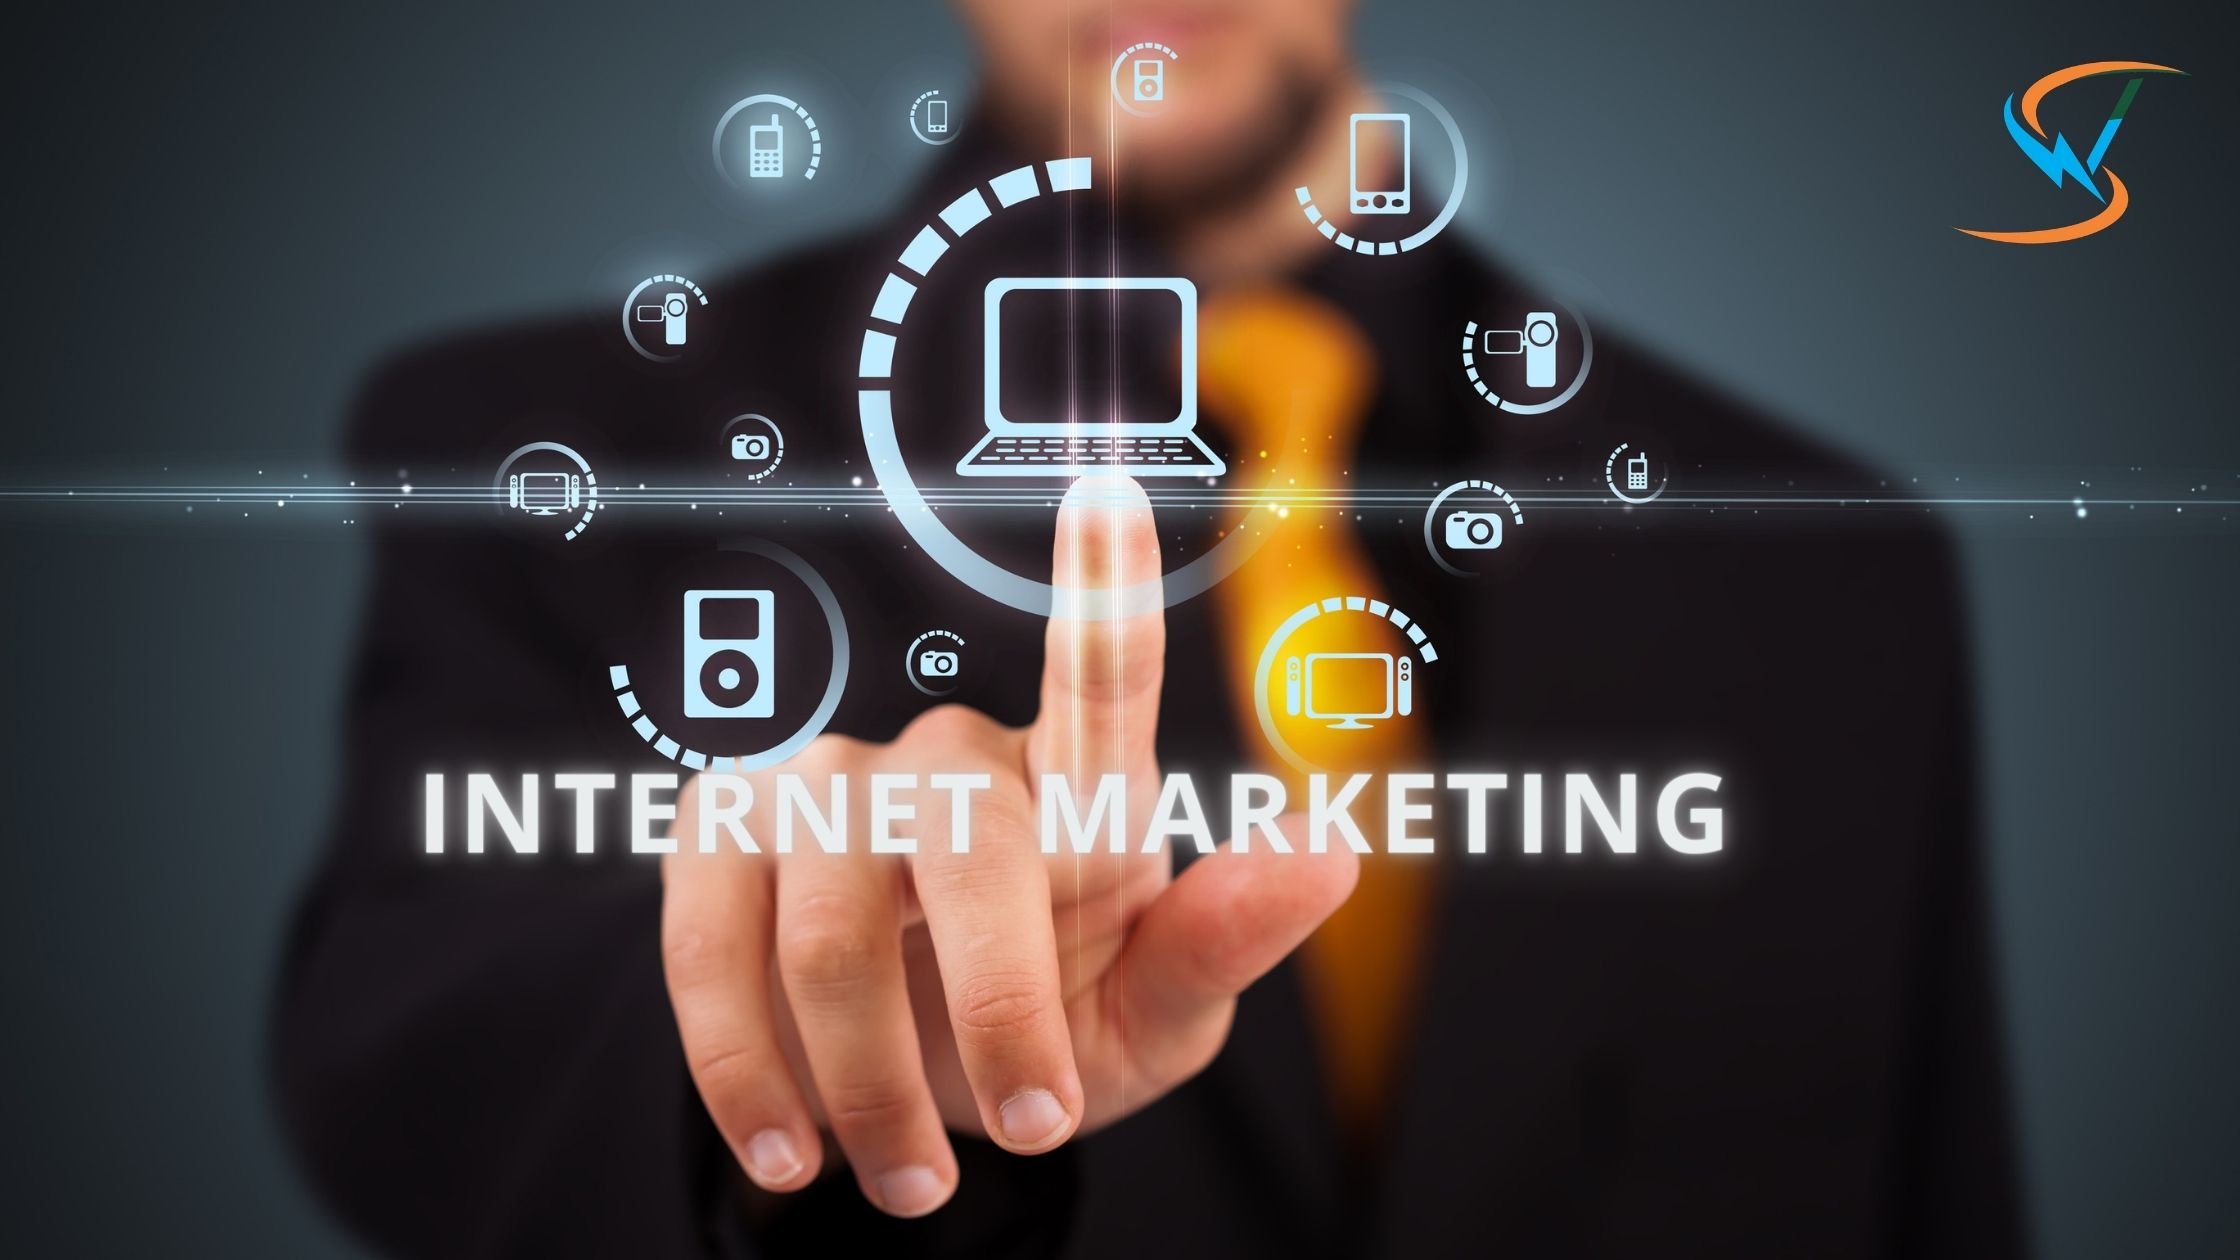 Internet Marketing Has Never Been This Easy Before!